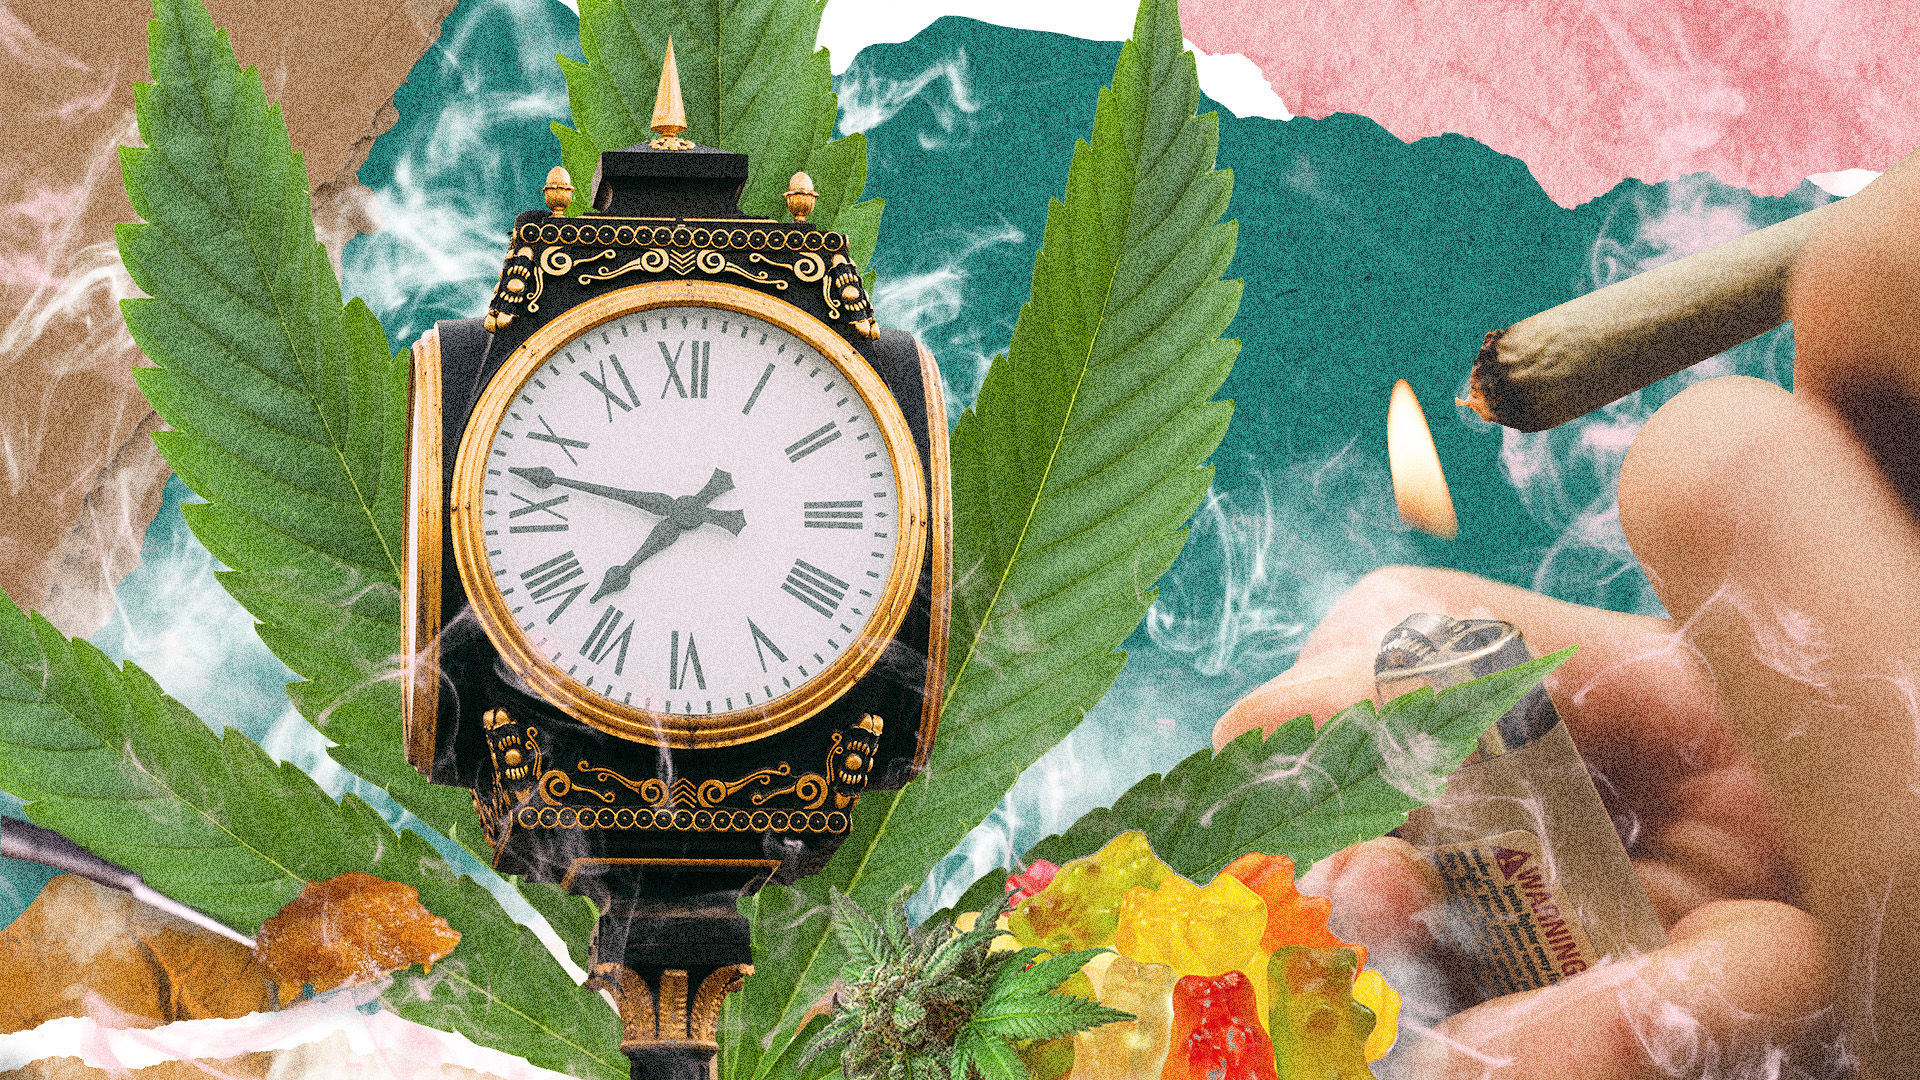 How Long Does A Cannabis High Last? Vaping, Dabbing, & More